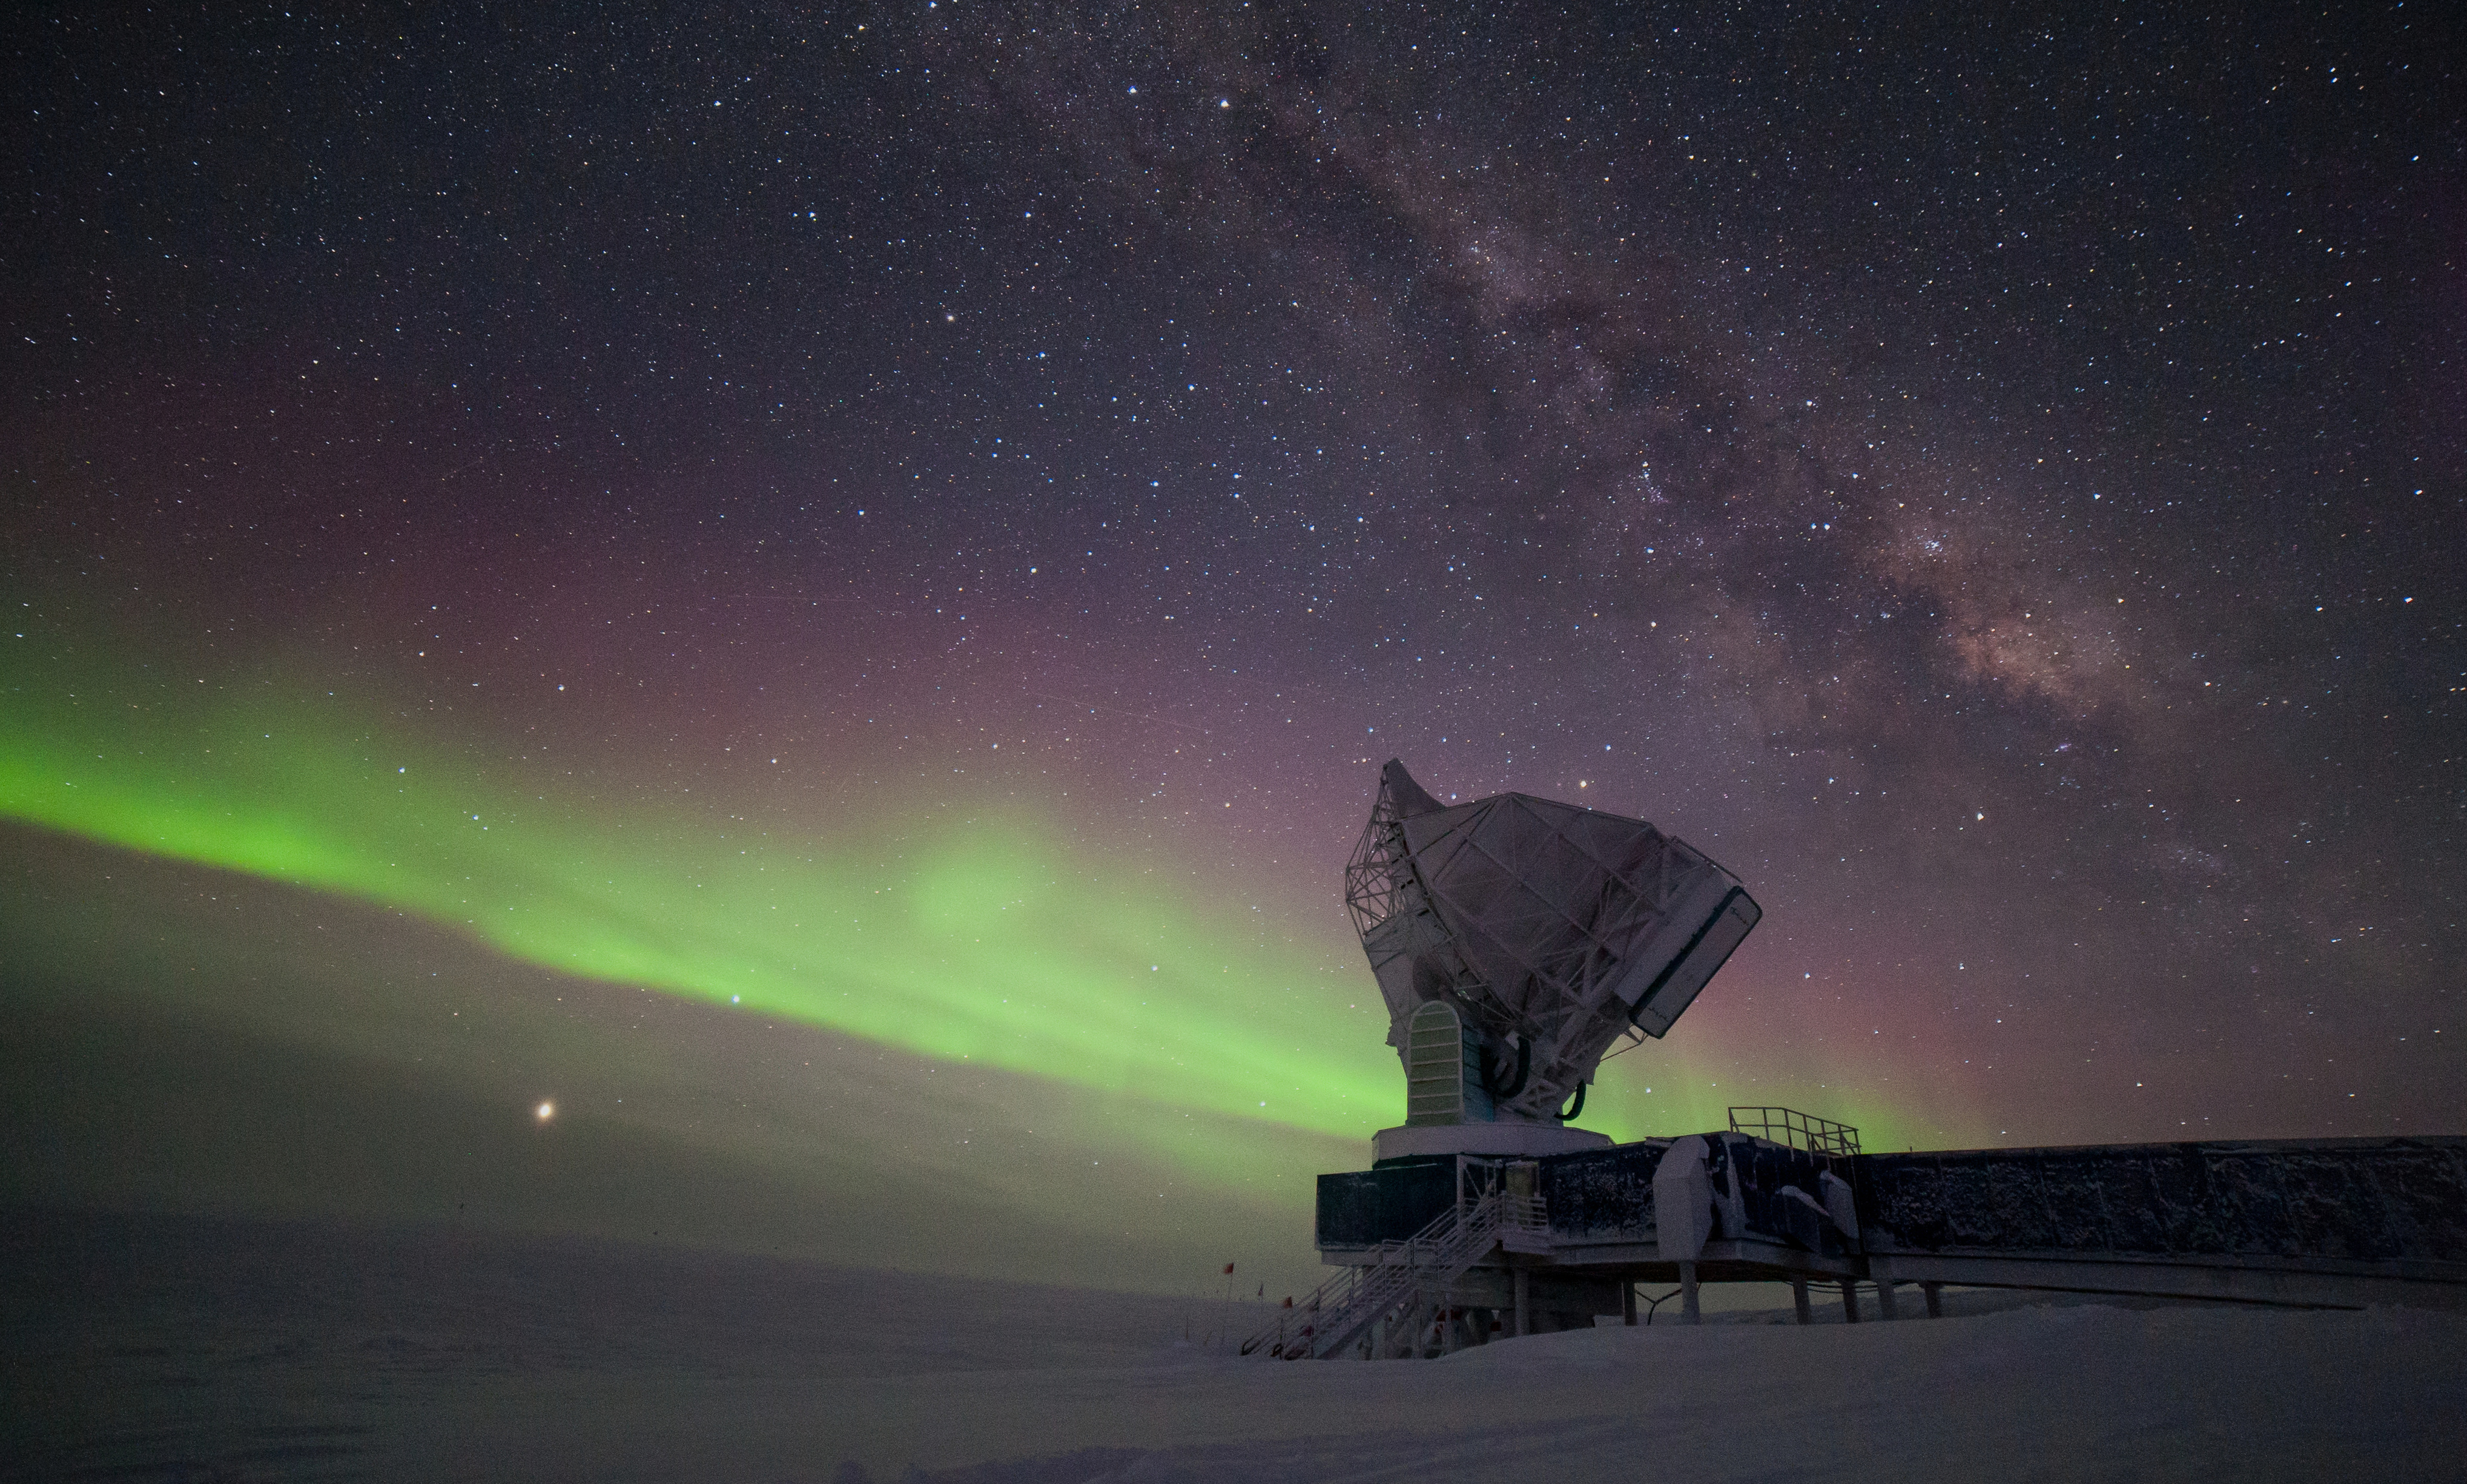 Auroras and the Milky Way fill a night sky over a telescope.